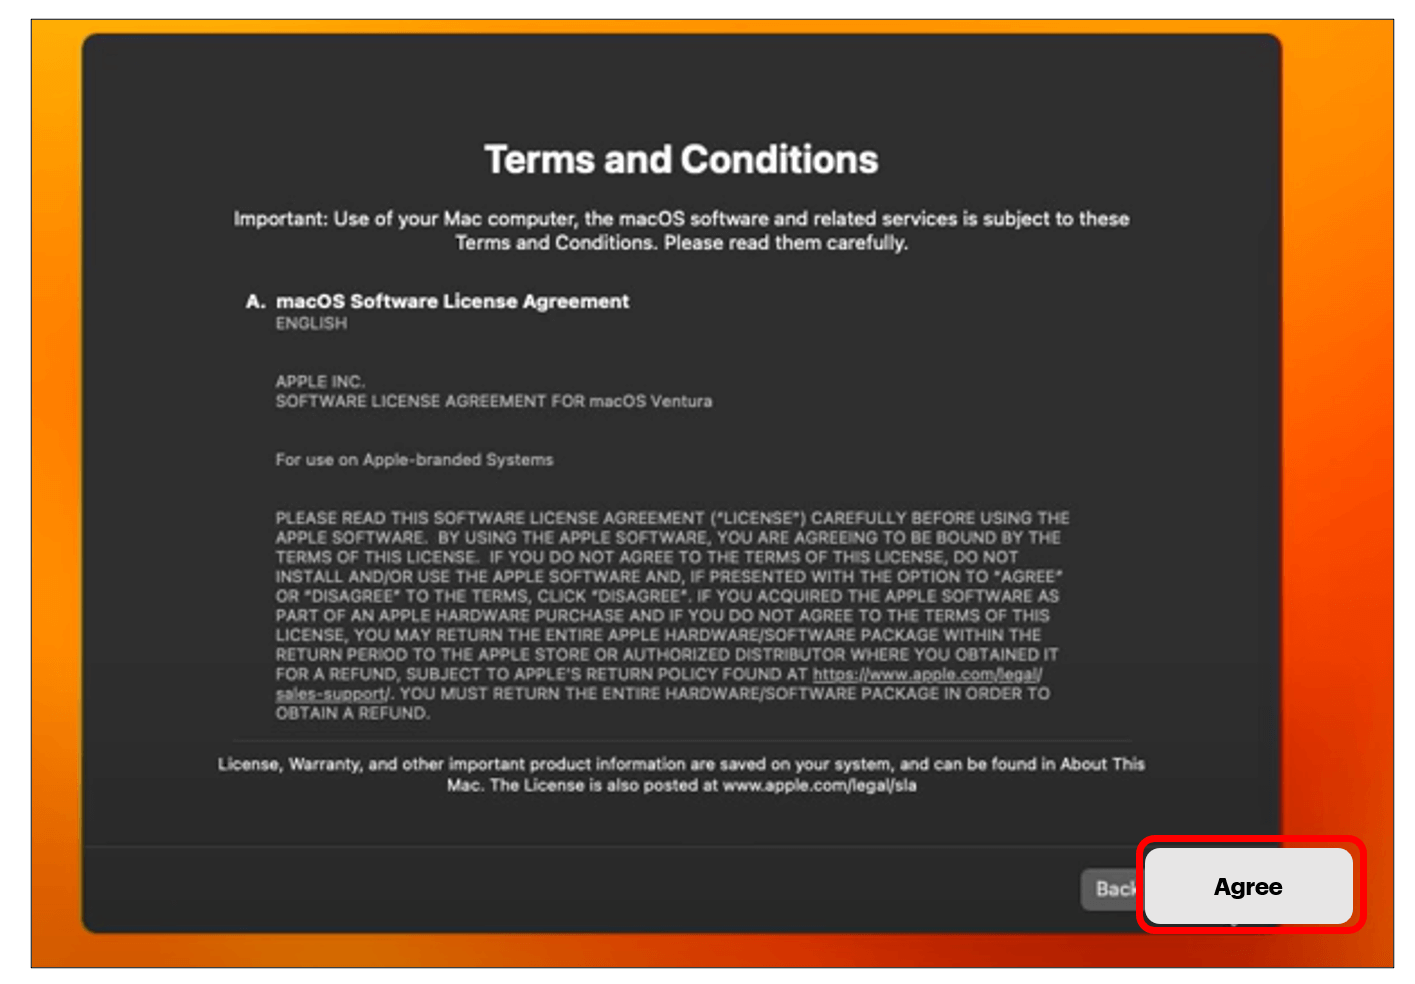 Terms and conditions with Agree highlighted in red in bottom right corner.